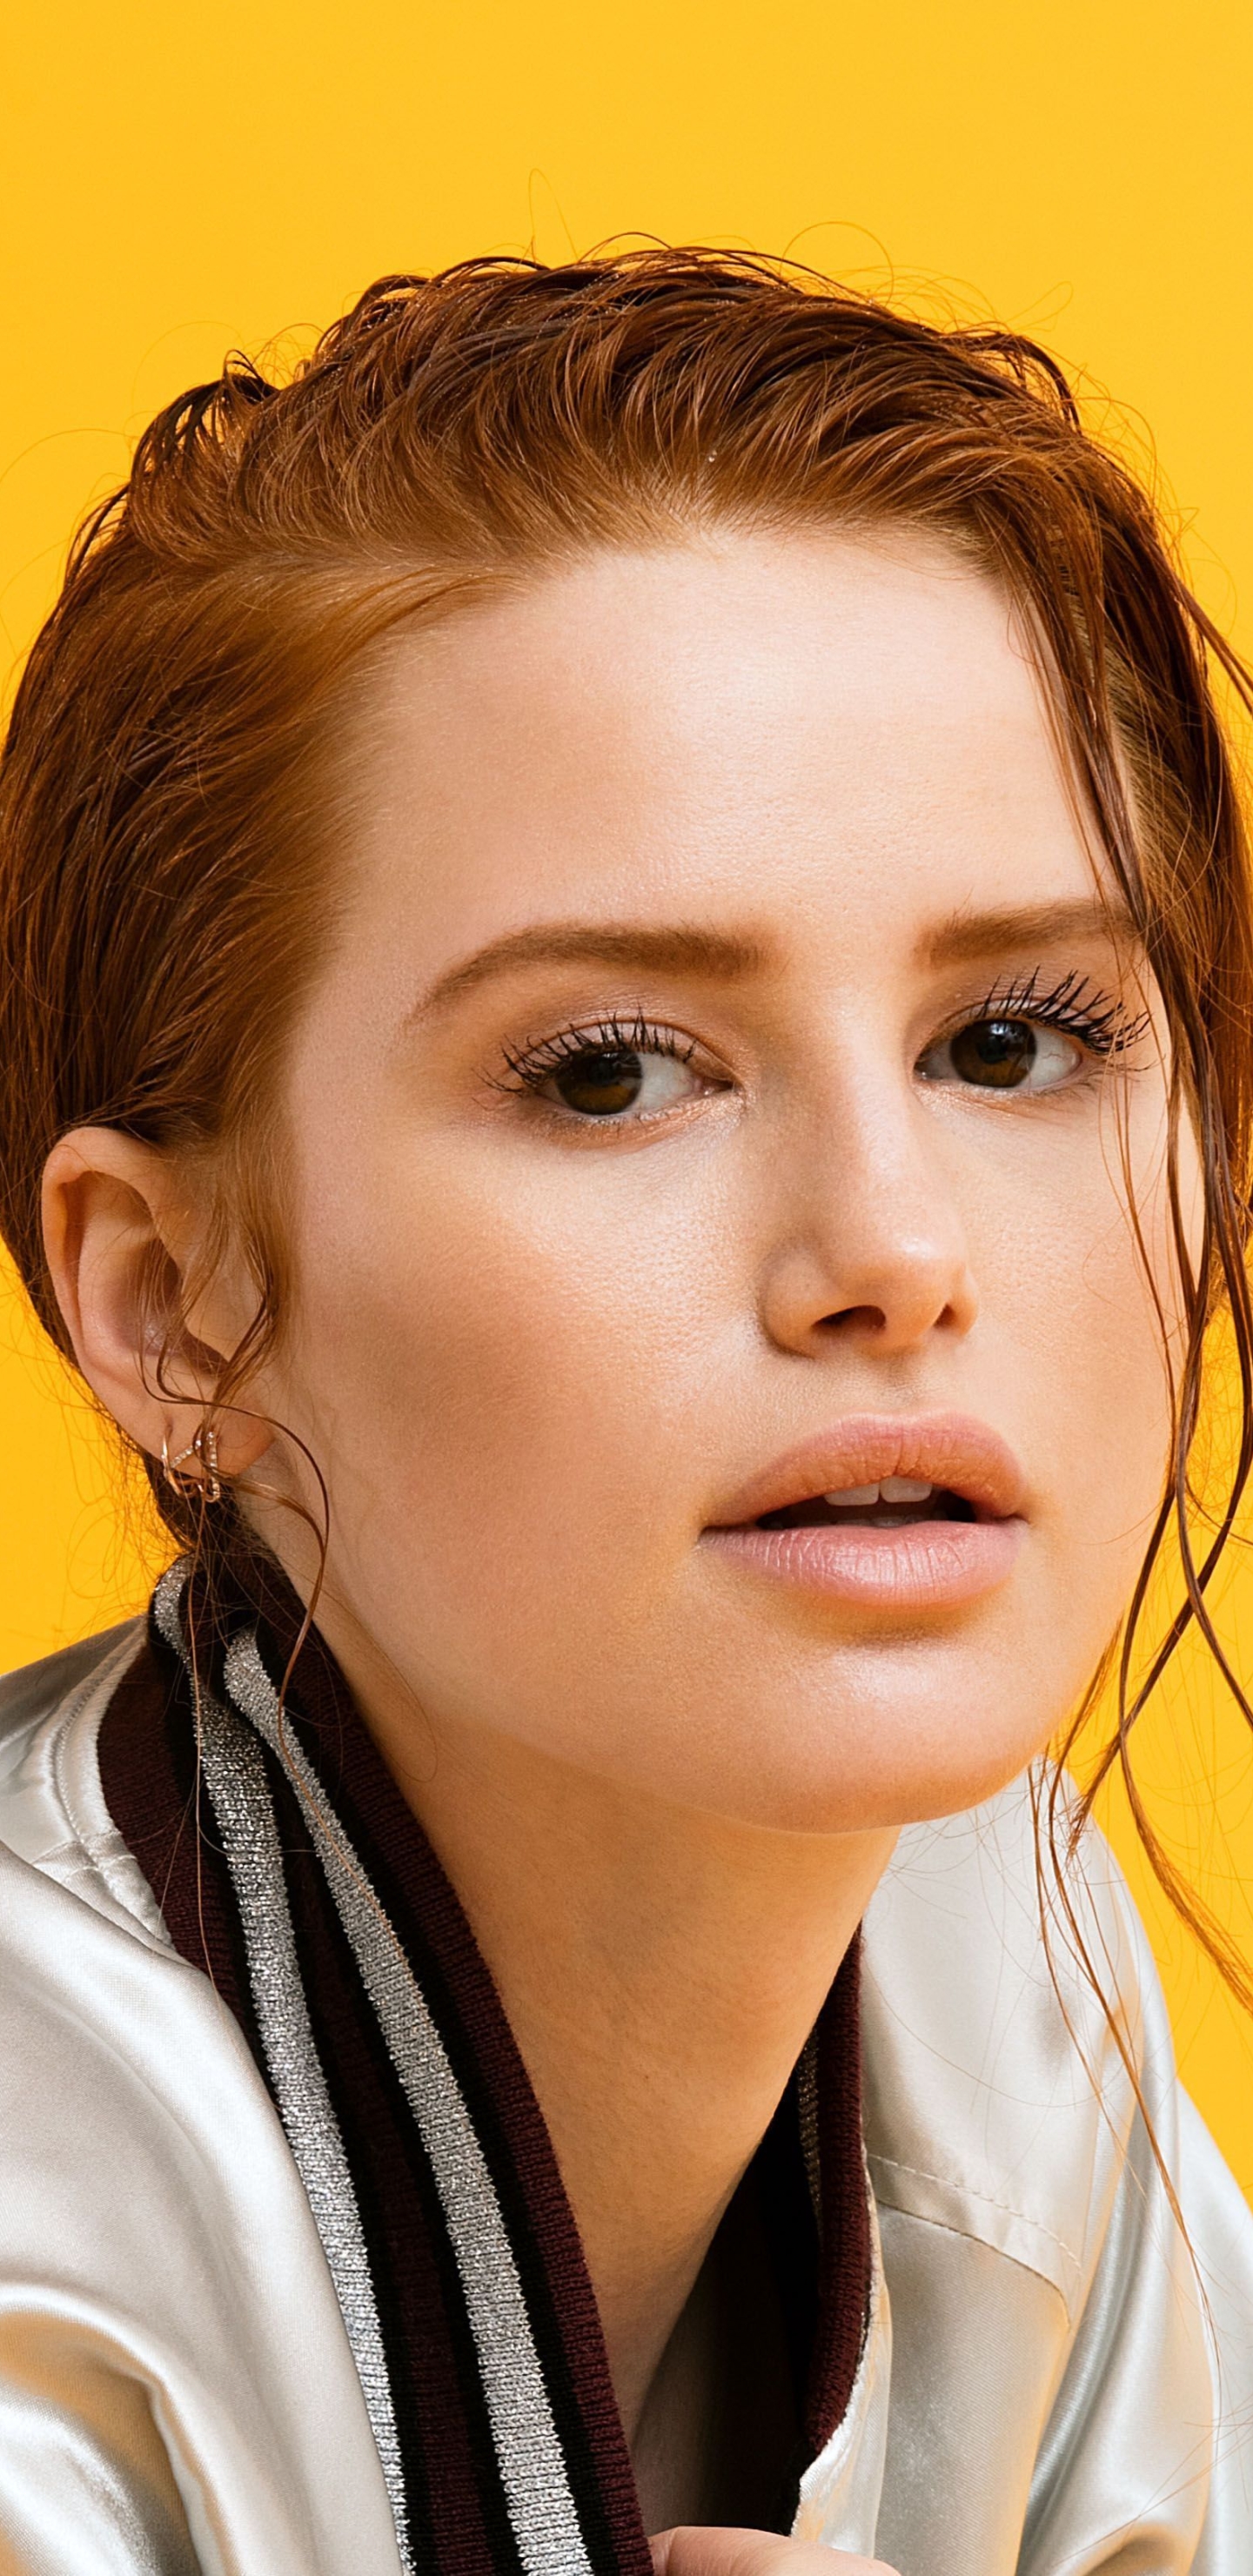 celebrity, madelaine petsch, brown eyes, american, actress, redhead